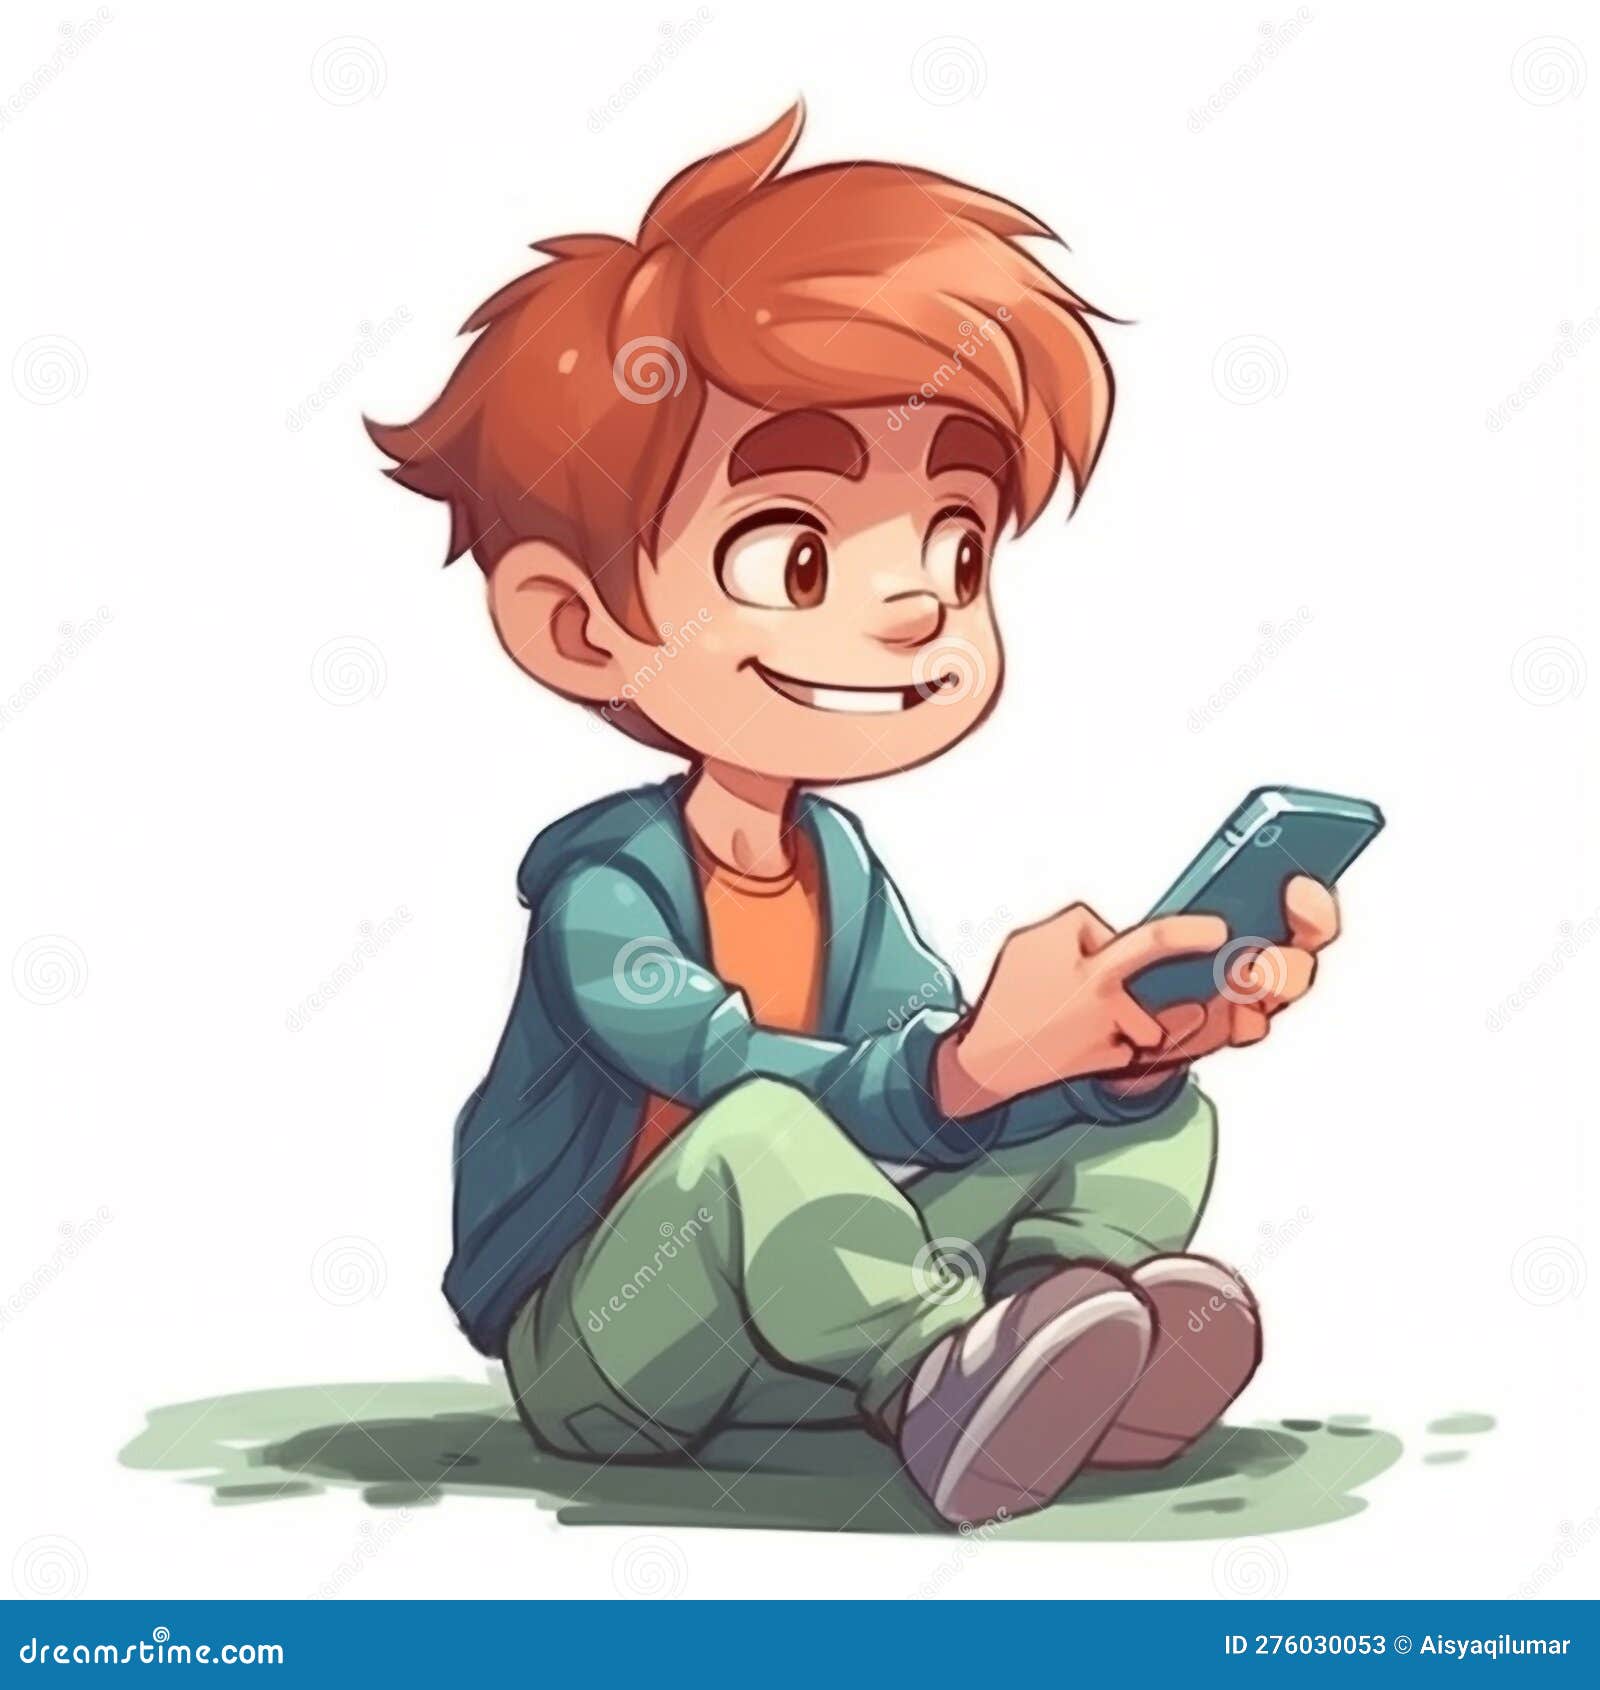 A Cartoon Illustration of a Child Sitting and Playing Mobile Games ...